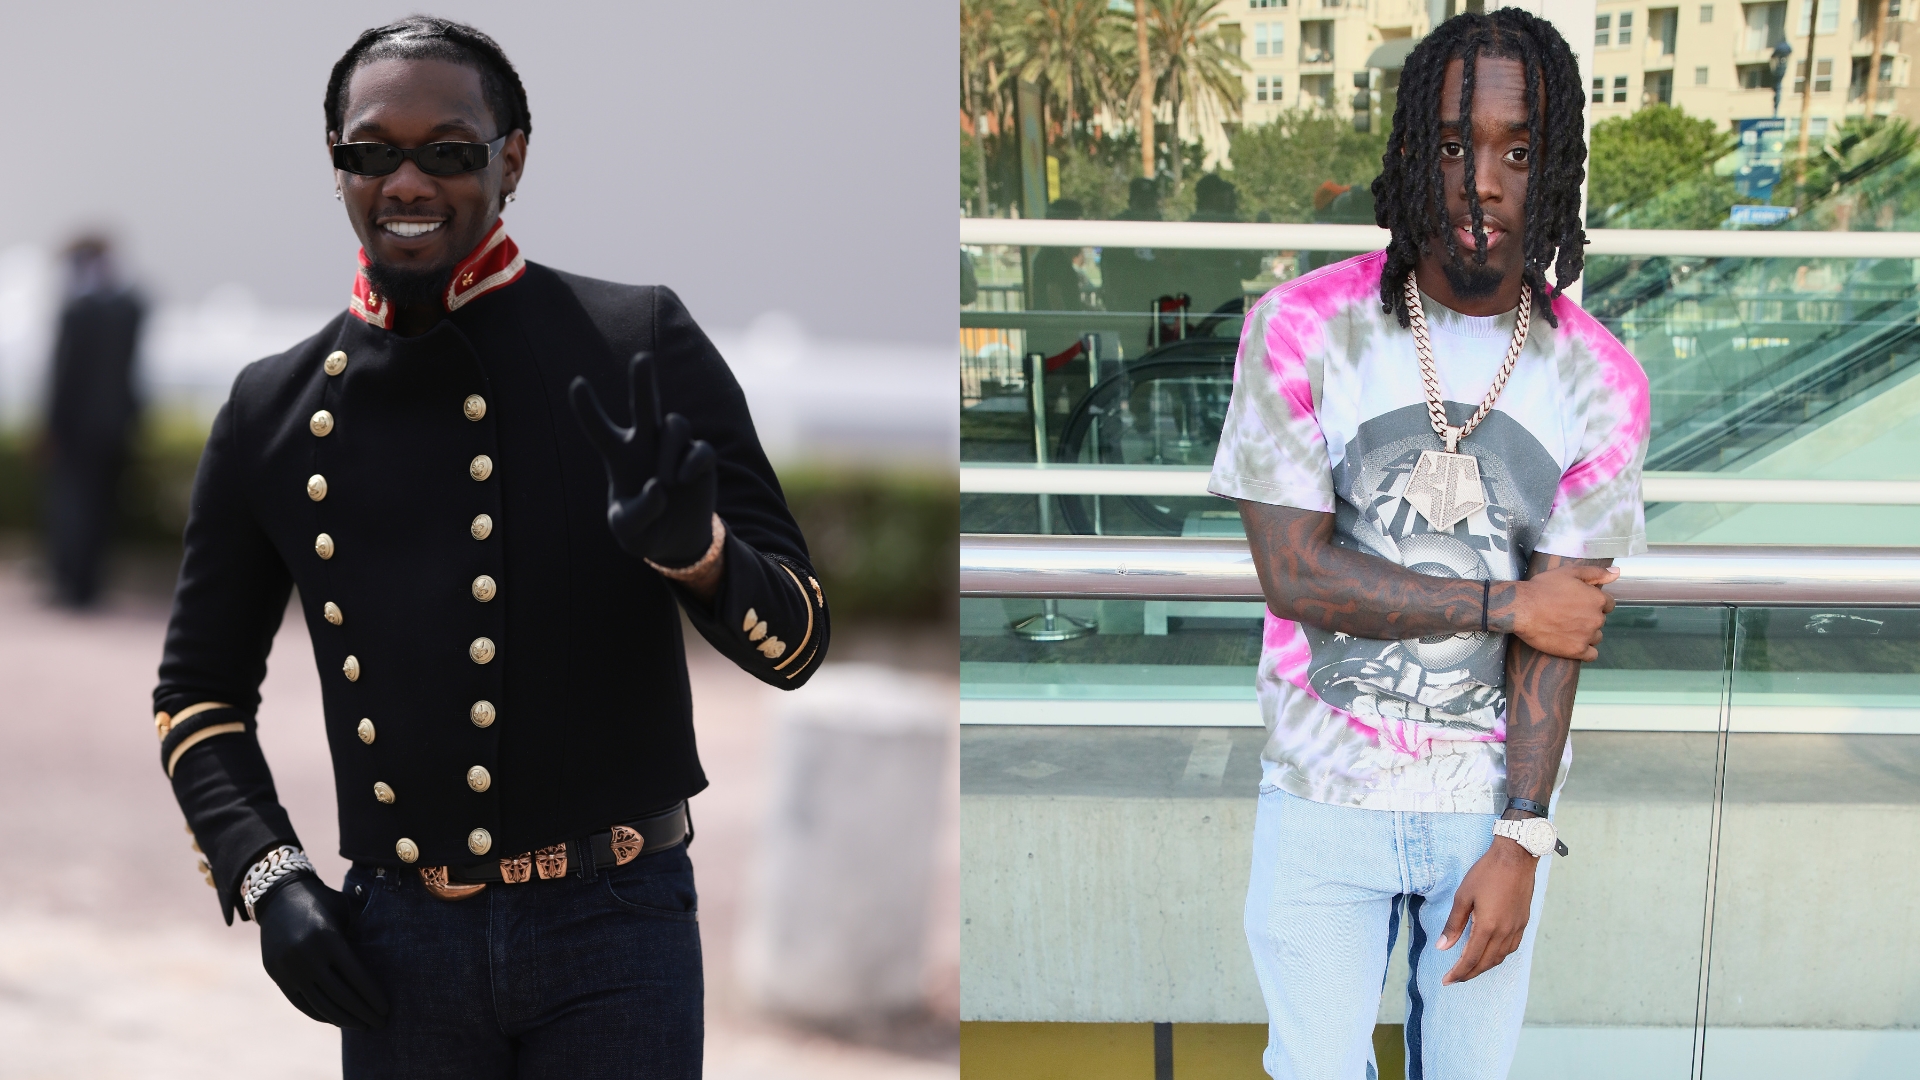 Offset Hits Wild Dance Moves With Kai Cenat On “Fan” Music Video Set